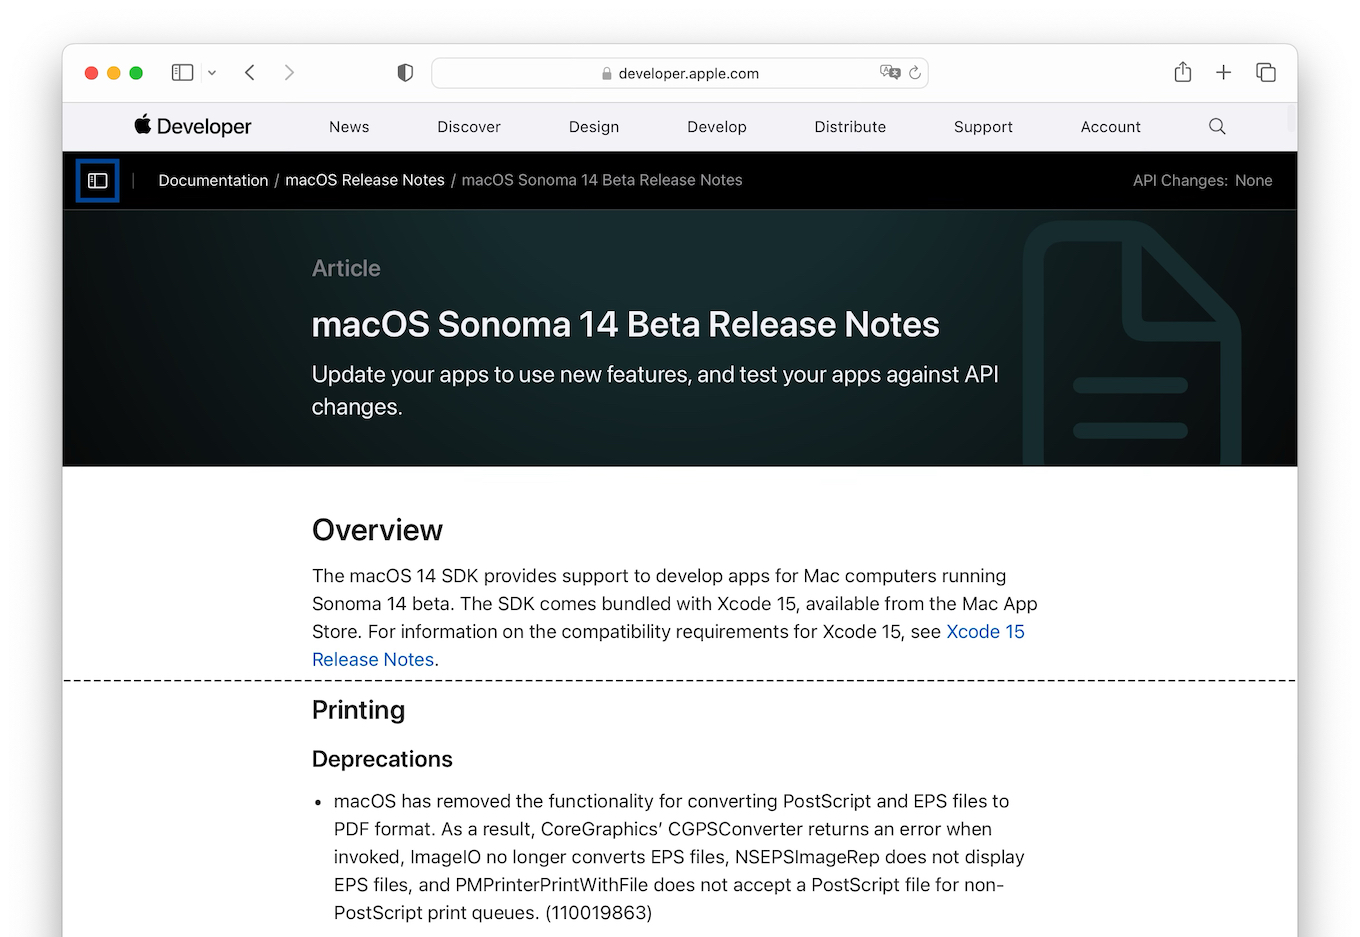 macOS 14 Sonomahas removed func for converting PS and EPS to PDF